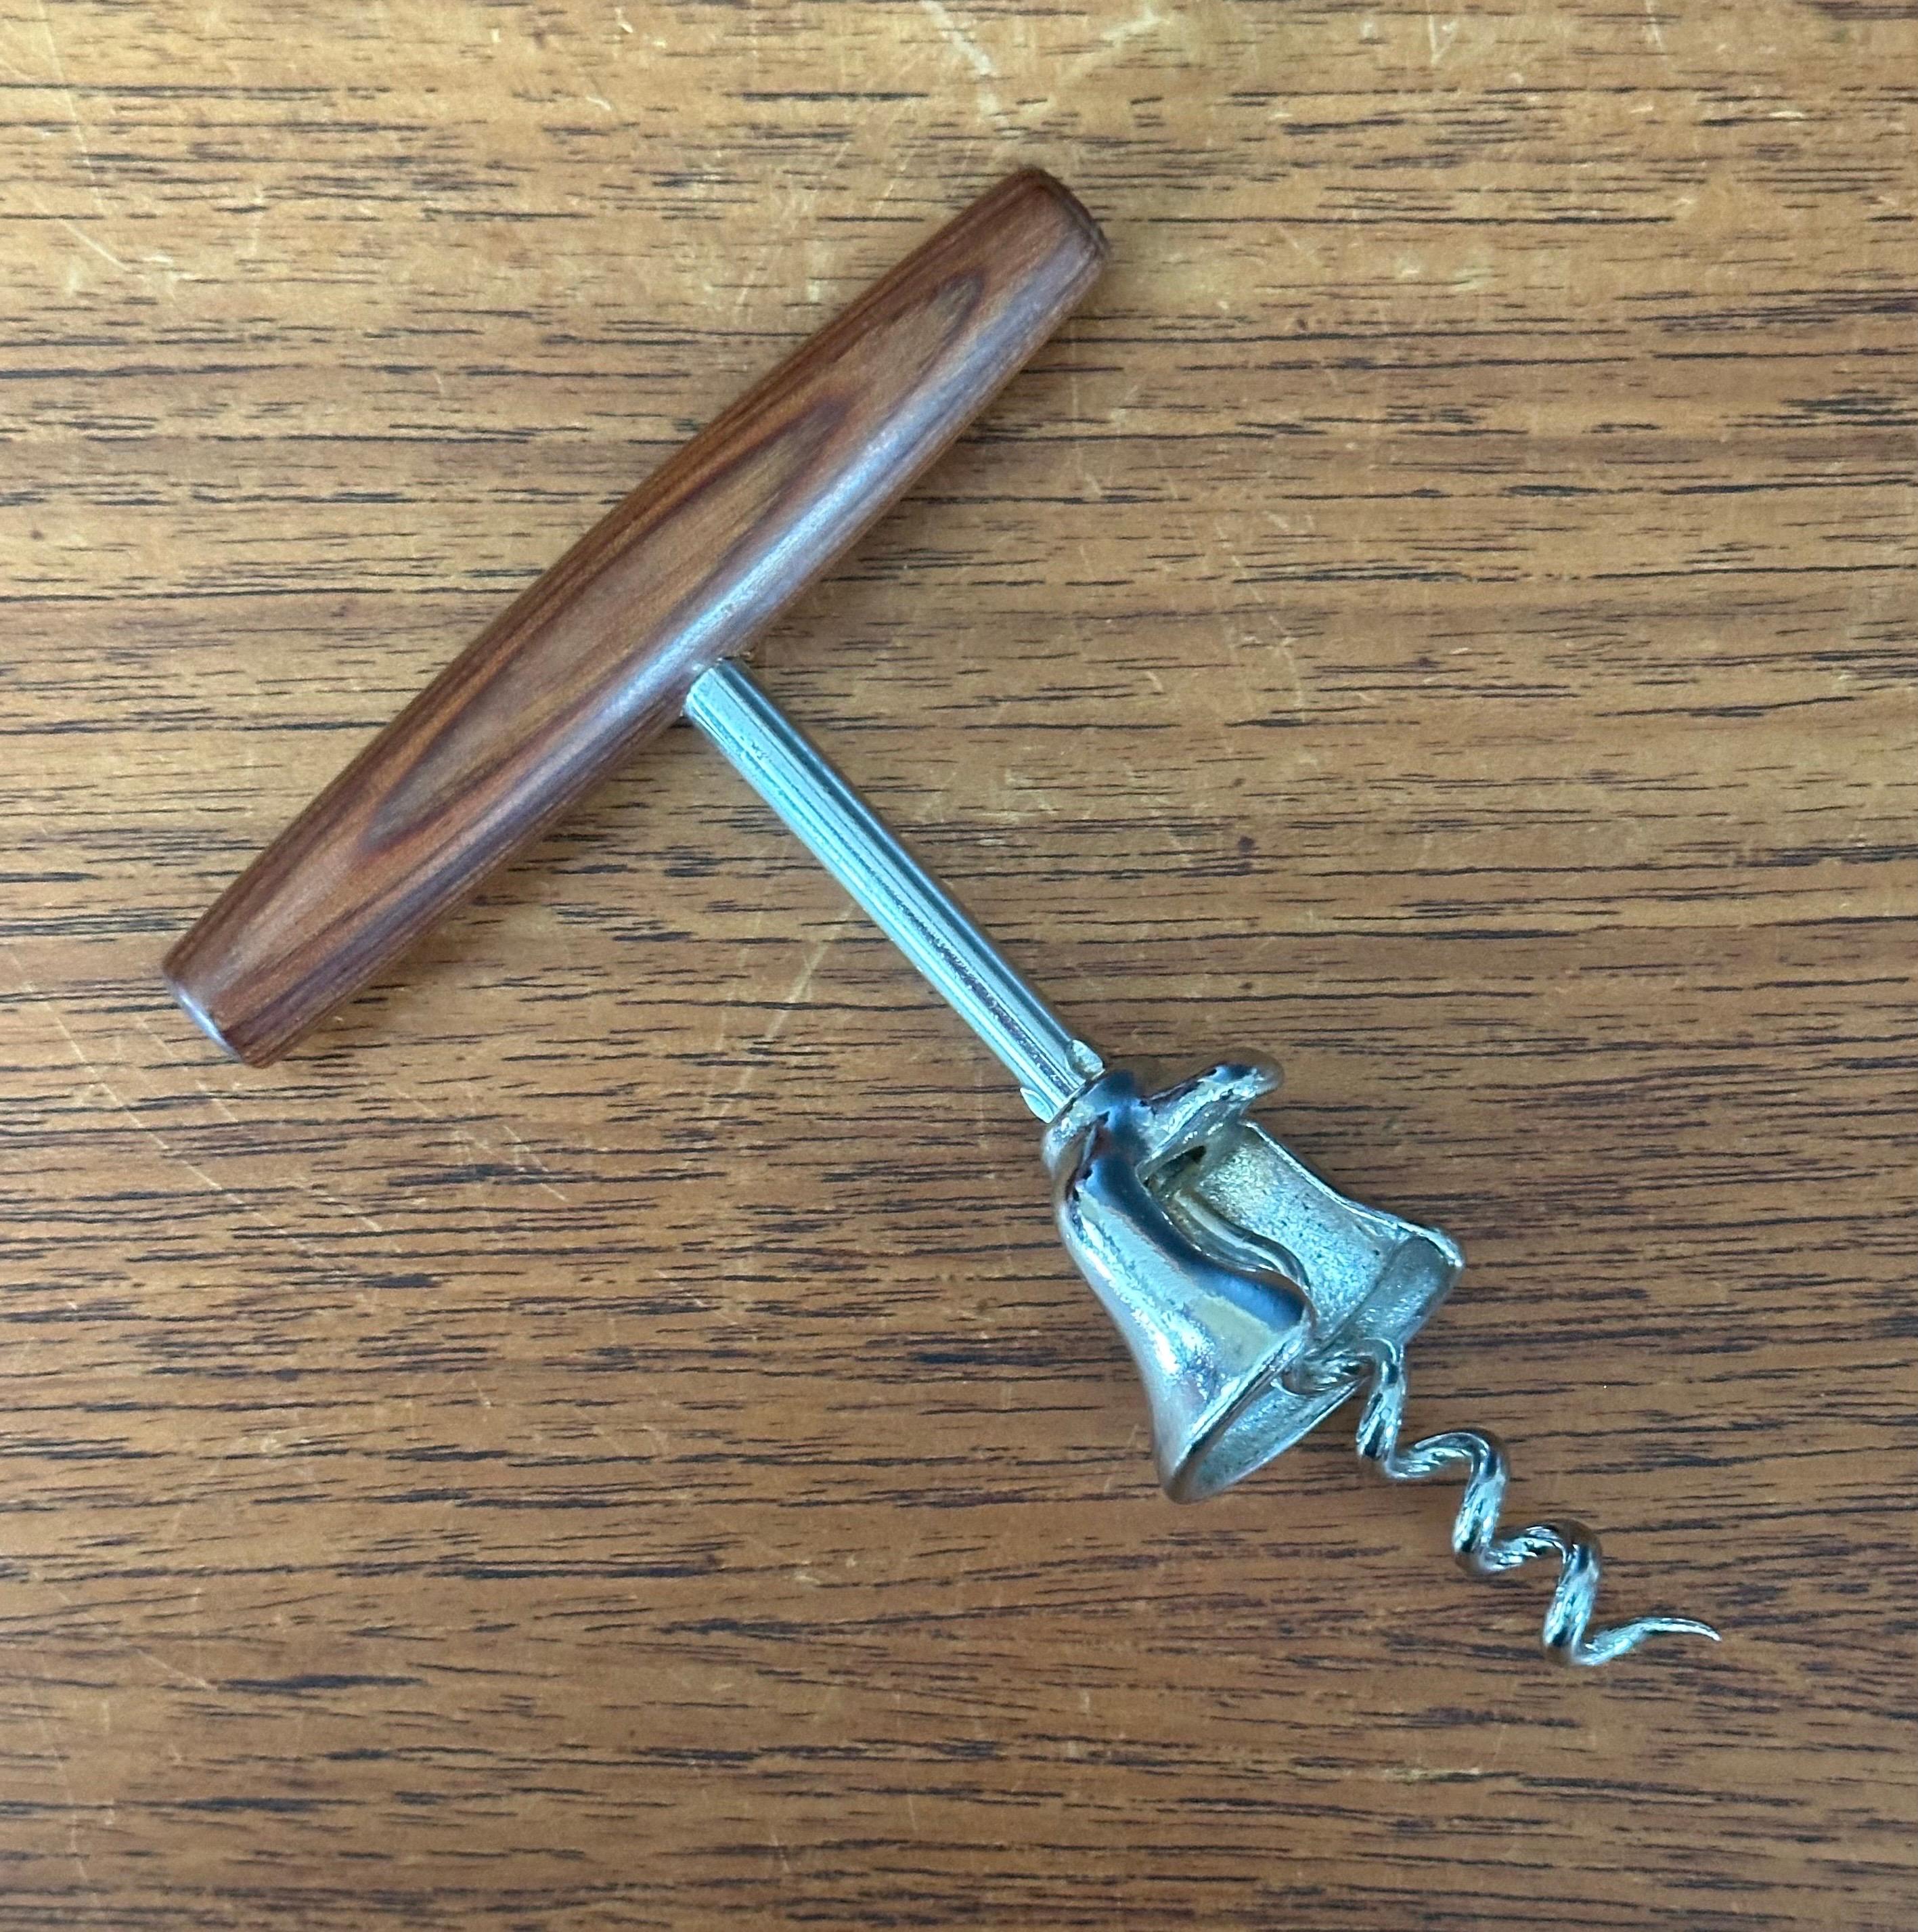 MCM Walnut Handled Wine Opener / Corkscrew In Good Condition For Sale In San Diego, CA